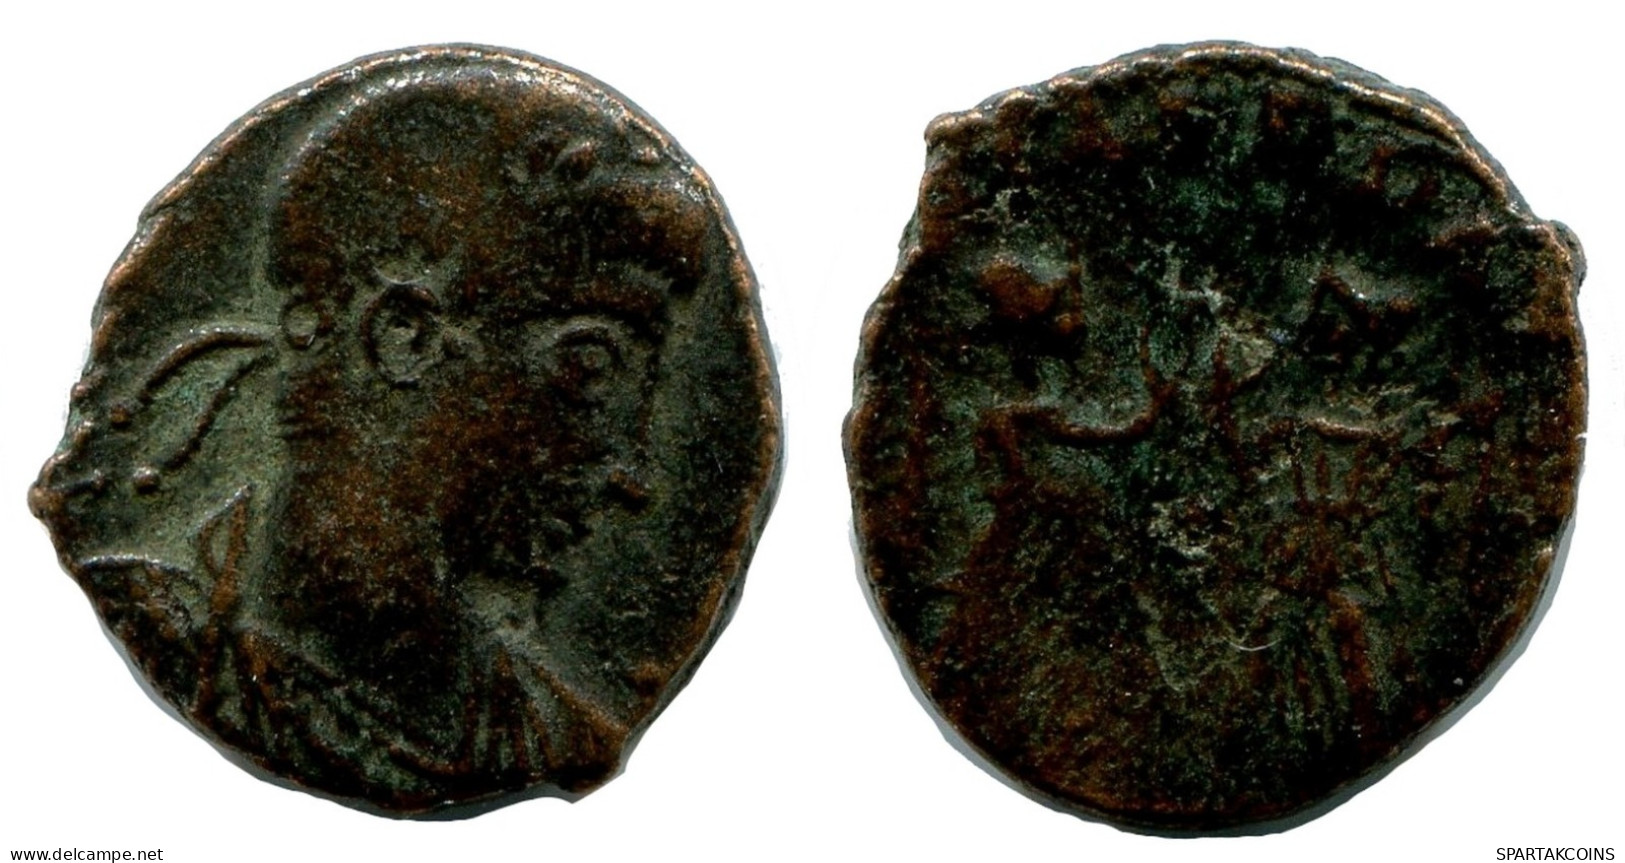 CONSTANTIUS II MINT UNCERTAIN FOUND IN IHNASYAH HOARD EGYPT #ANC10125.14.E.A - The Christian Empire (307 AD Tot 363 AD)